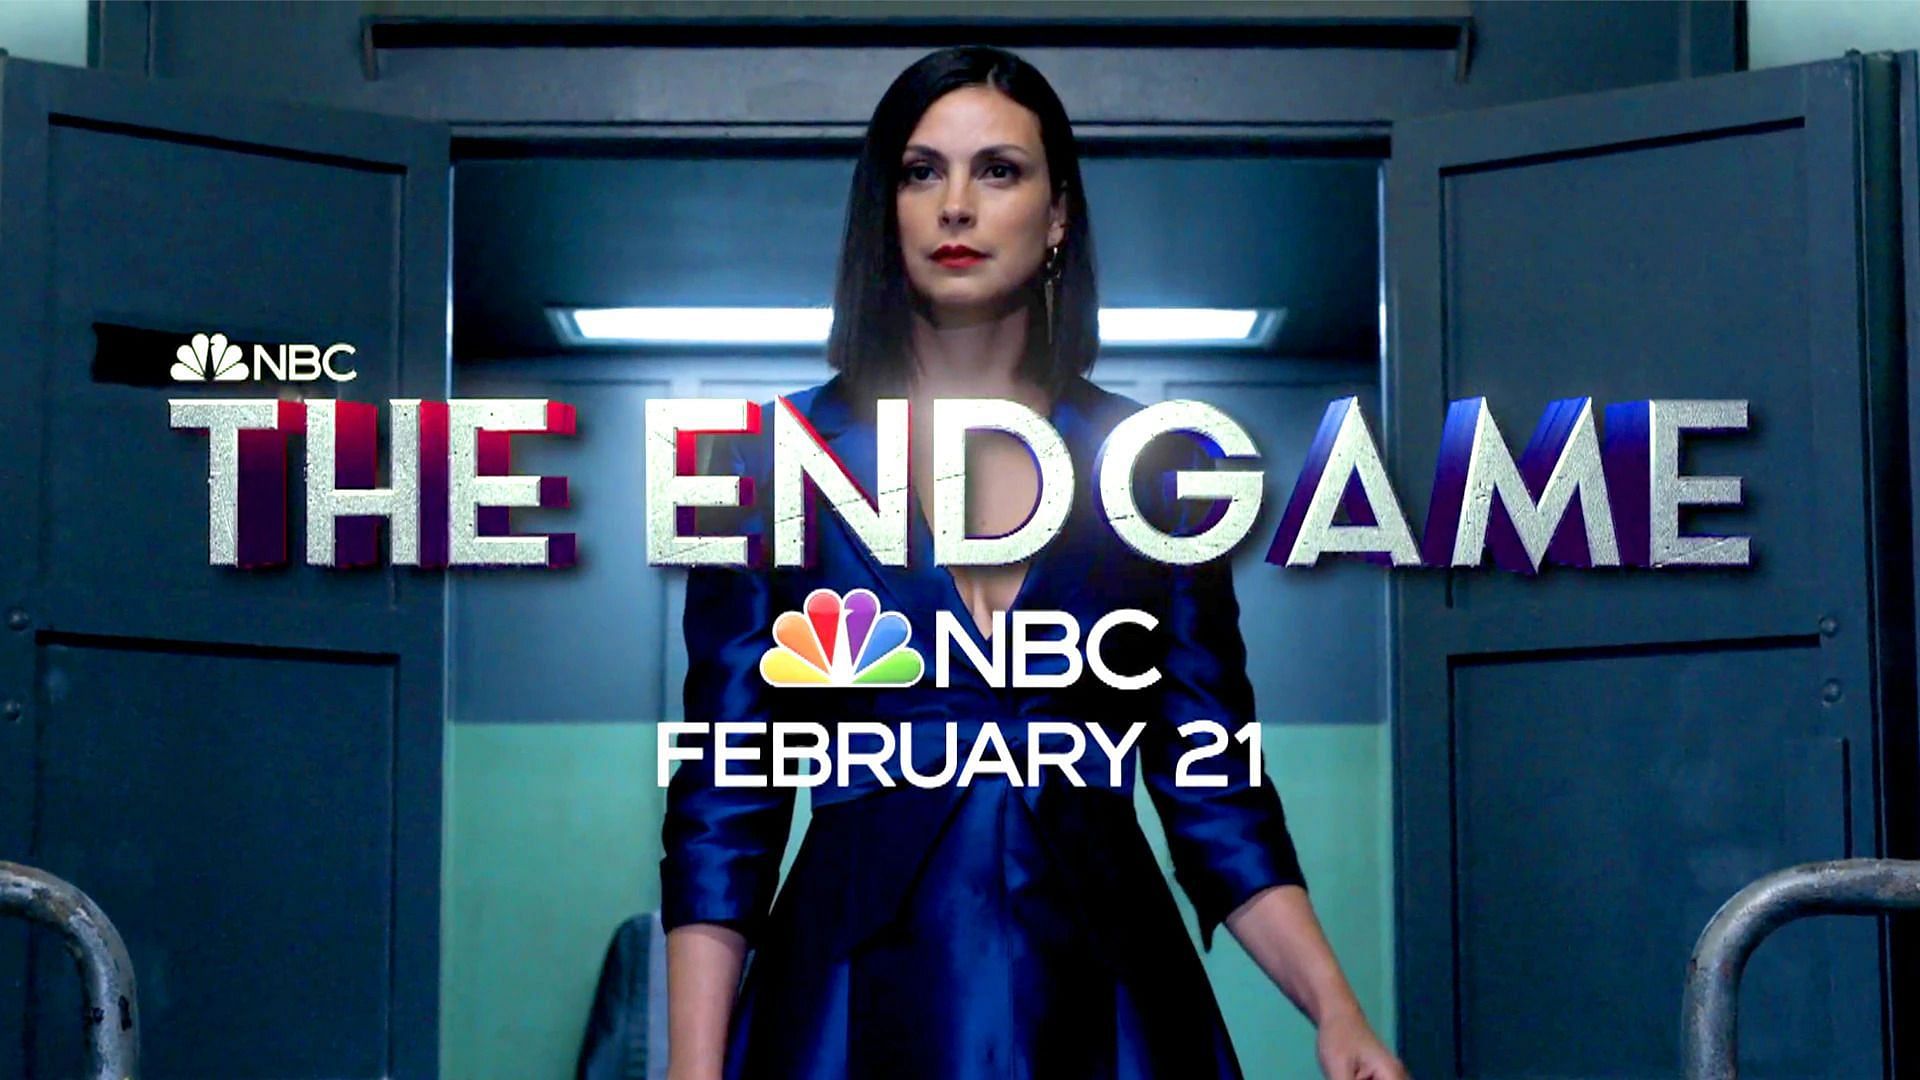 The Endgame Season 1, Episode 2: Release date, synopsis, and more